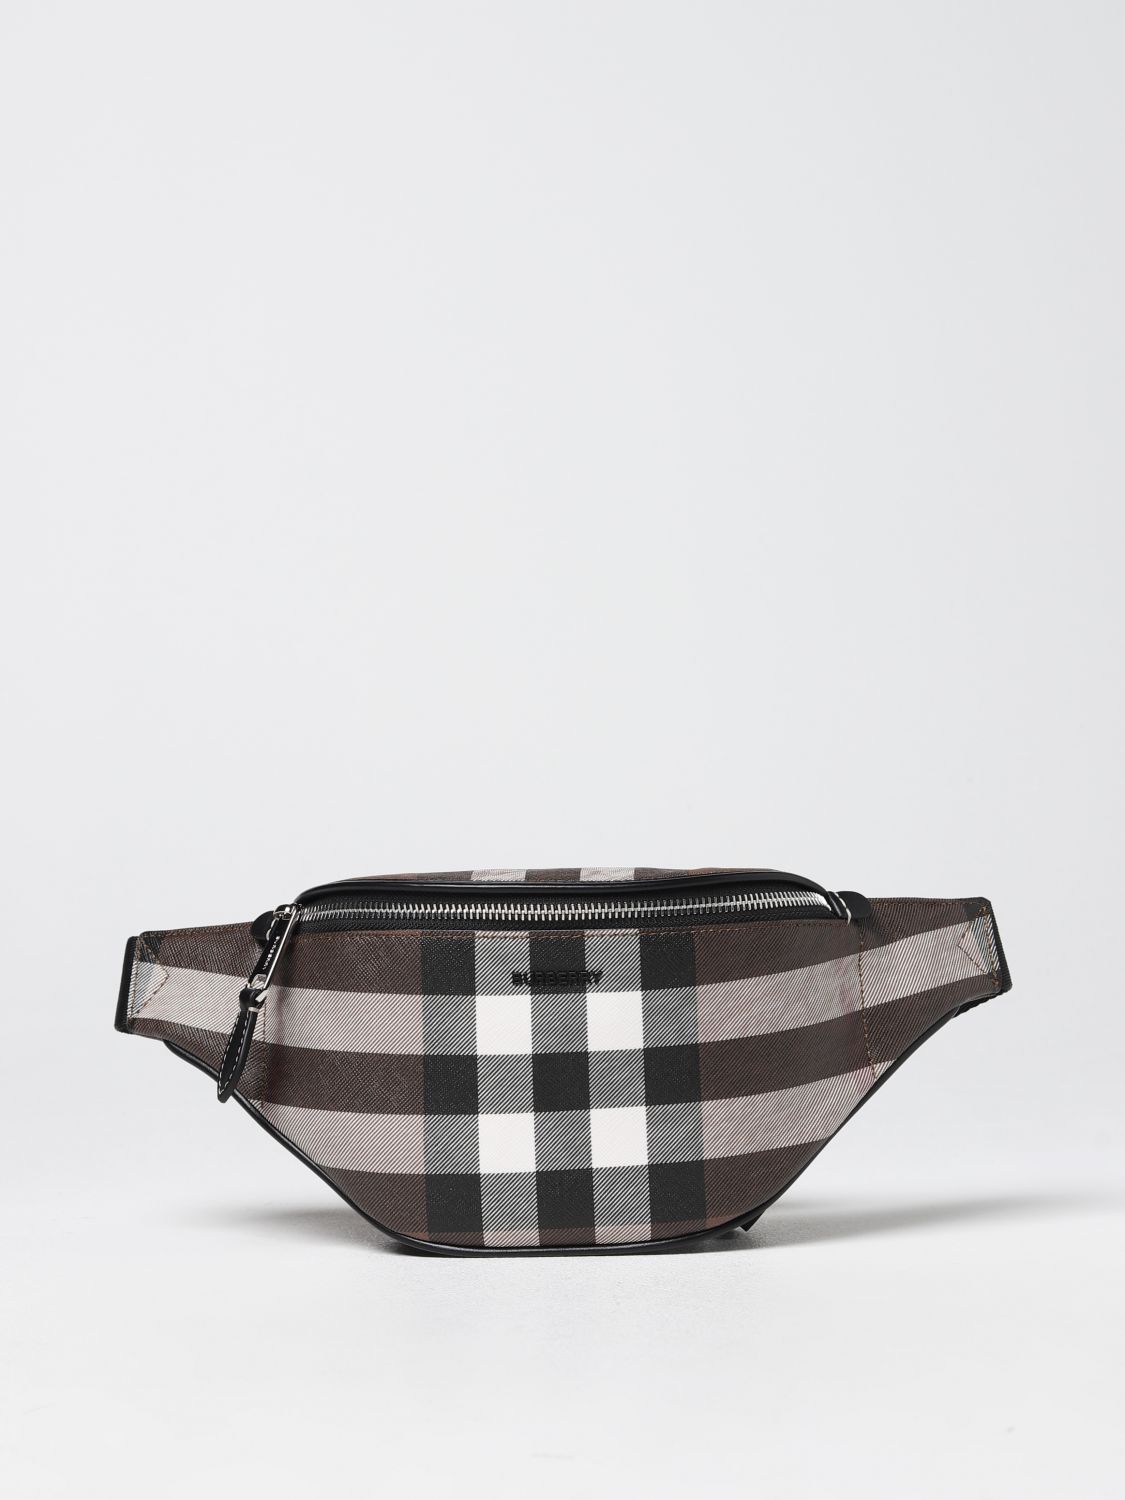 pessimist Bourgeon George Eliot BURBERRY: Cason pouch in coated fabric - Brown | Burberry belt bag 8064440  online at GIGLIO.COM